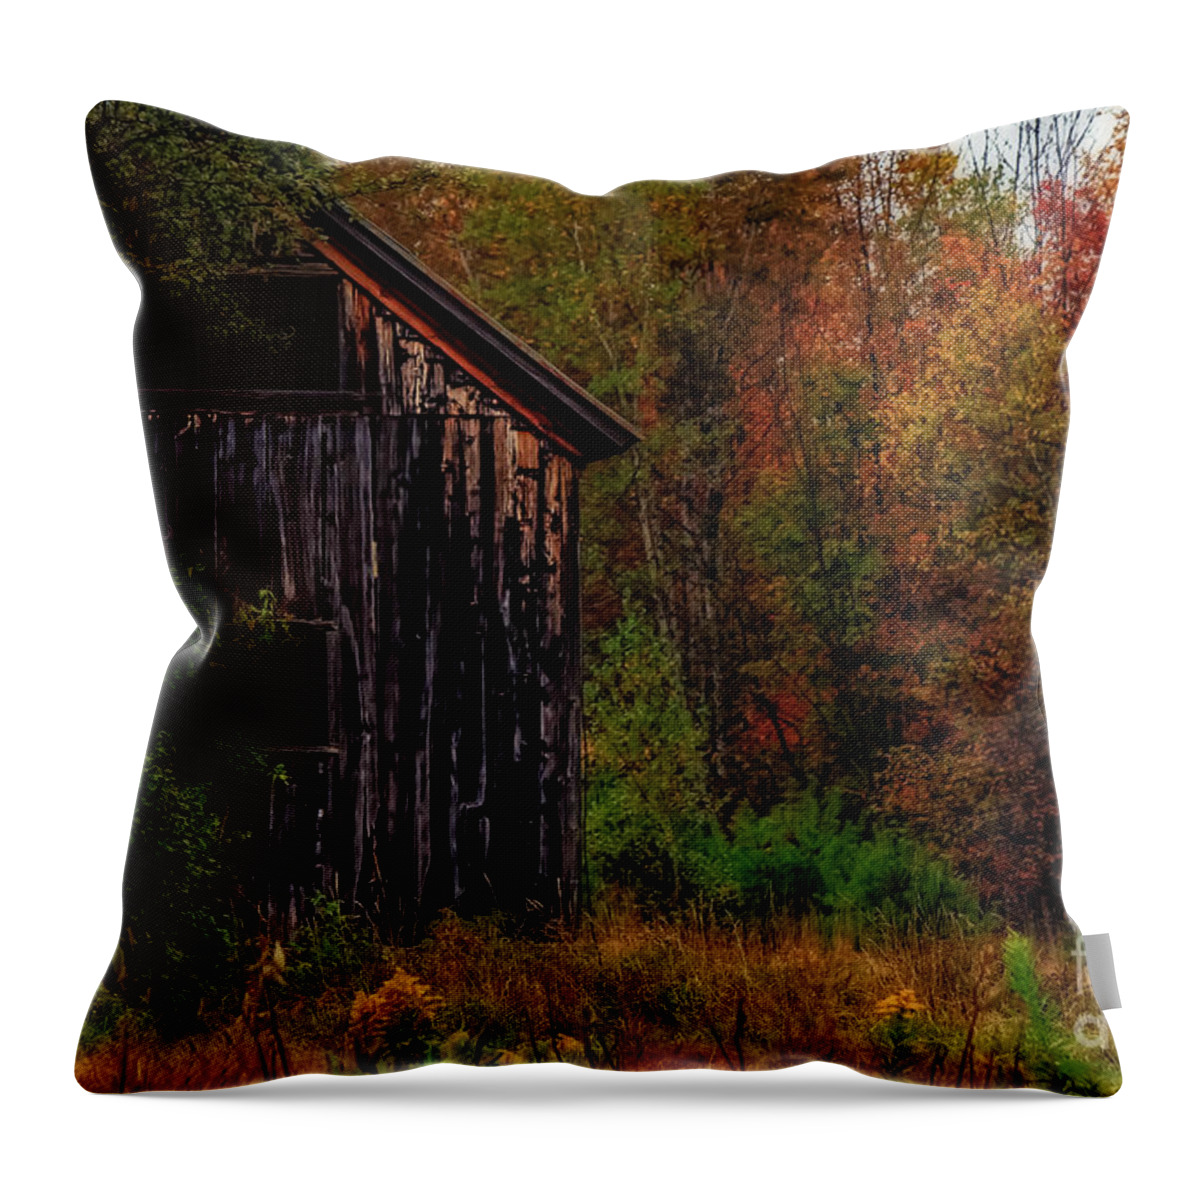 Barns Throw Pillow featuring the photograph Wilderness Barn by Brenda Giasson